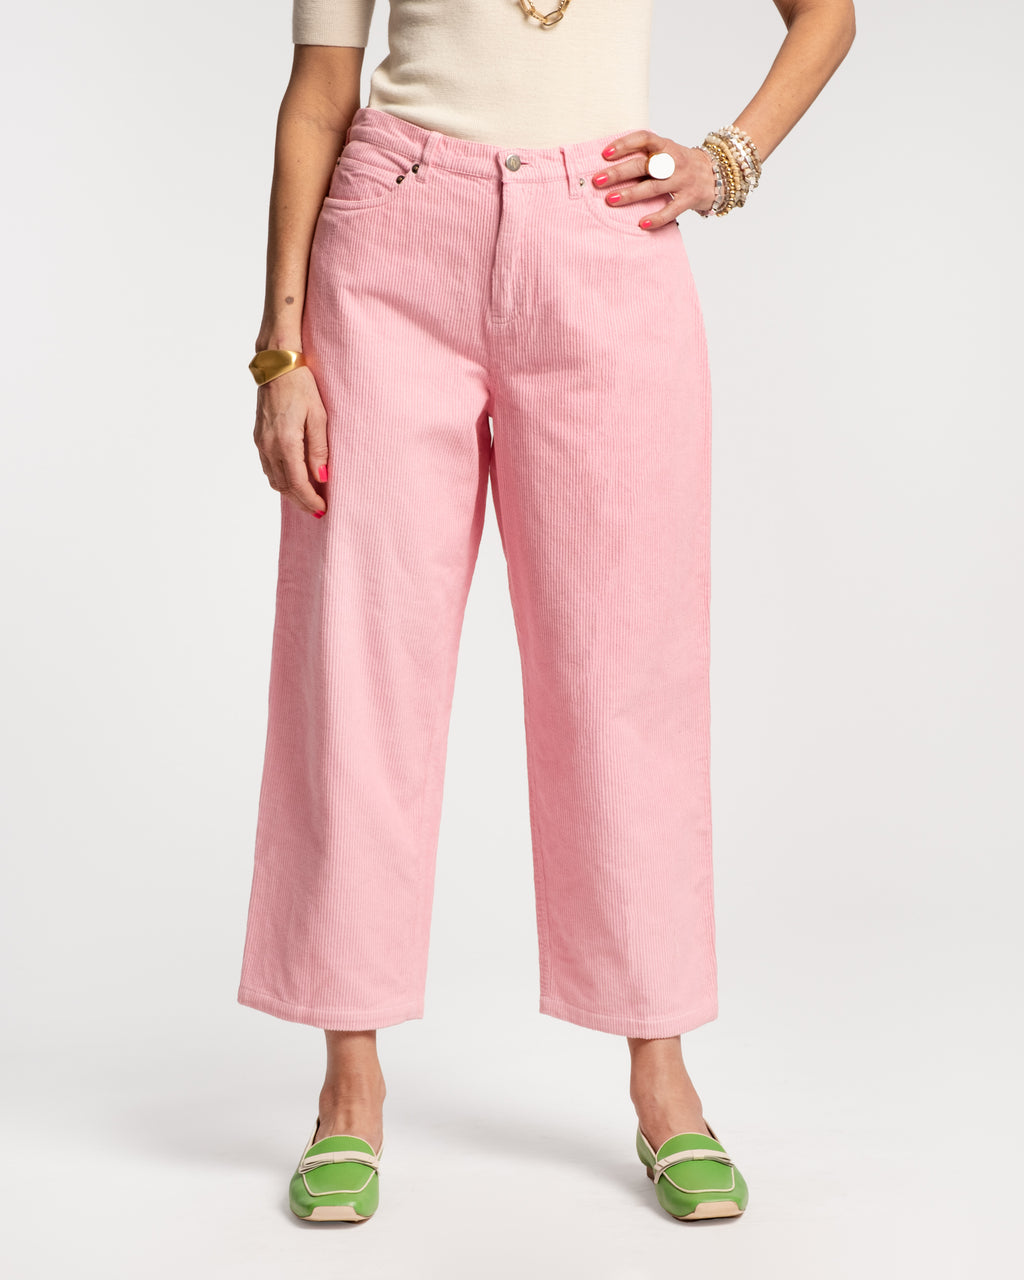 NWT A New Day Cropped Corduroy Pants 12 Pink